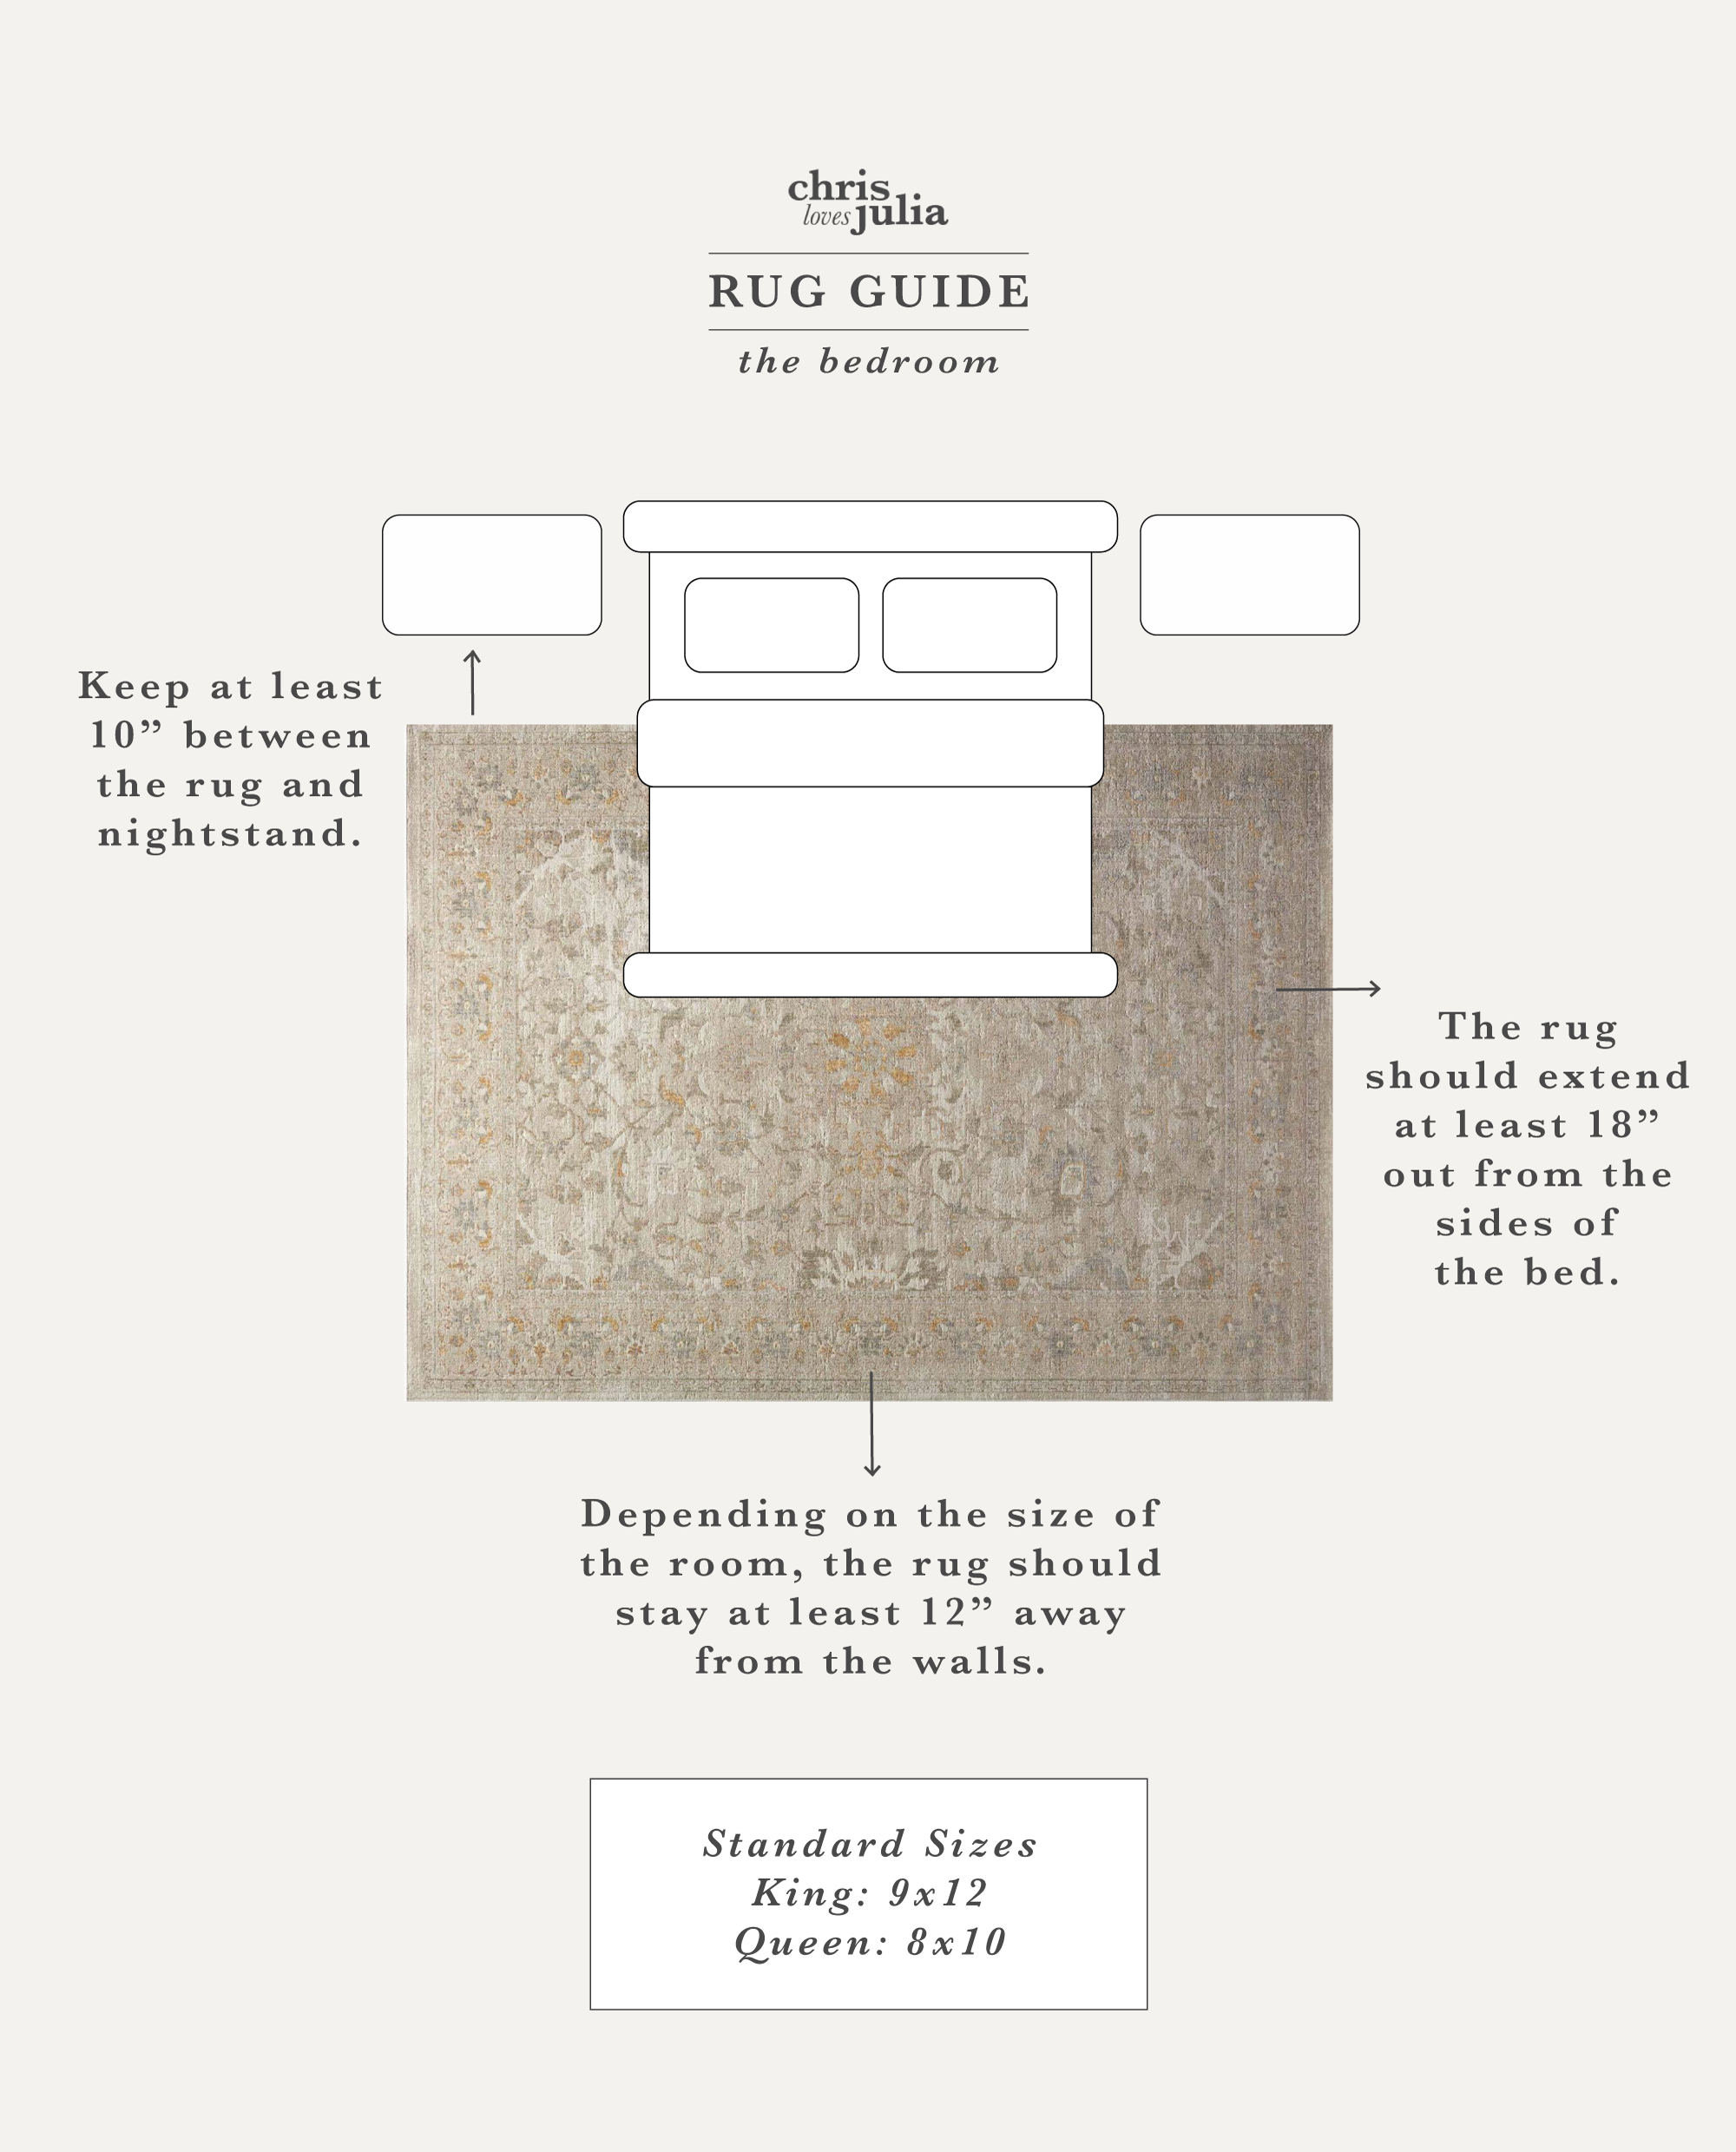 Bedroom Living Room Dining, How To Place An Area Rug Under A Queen Bed